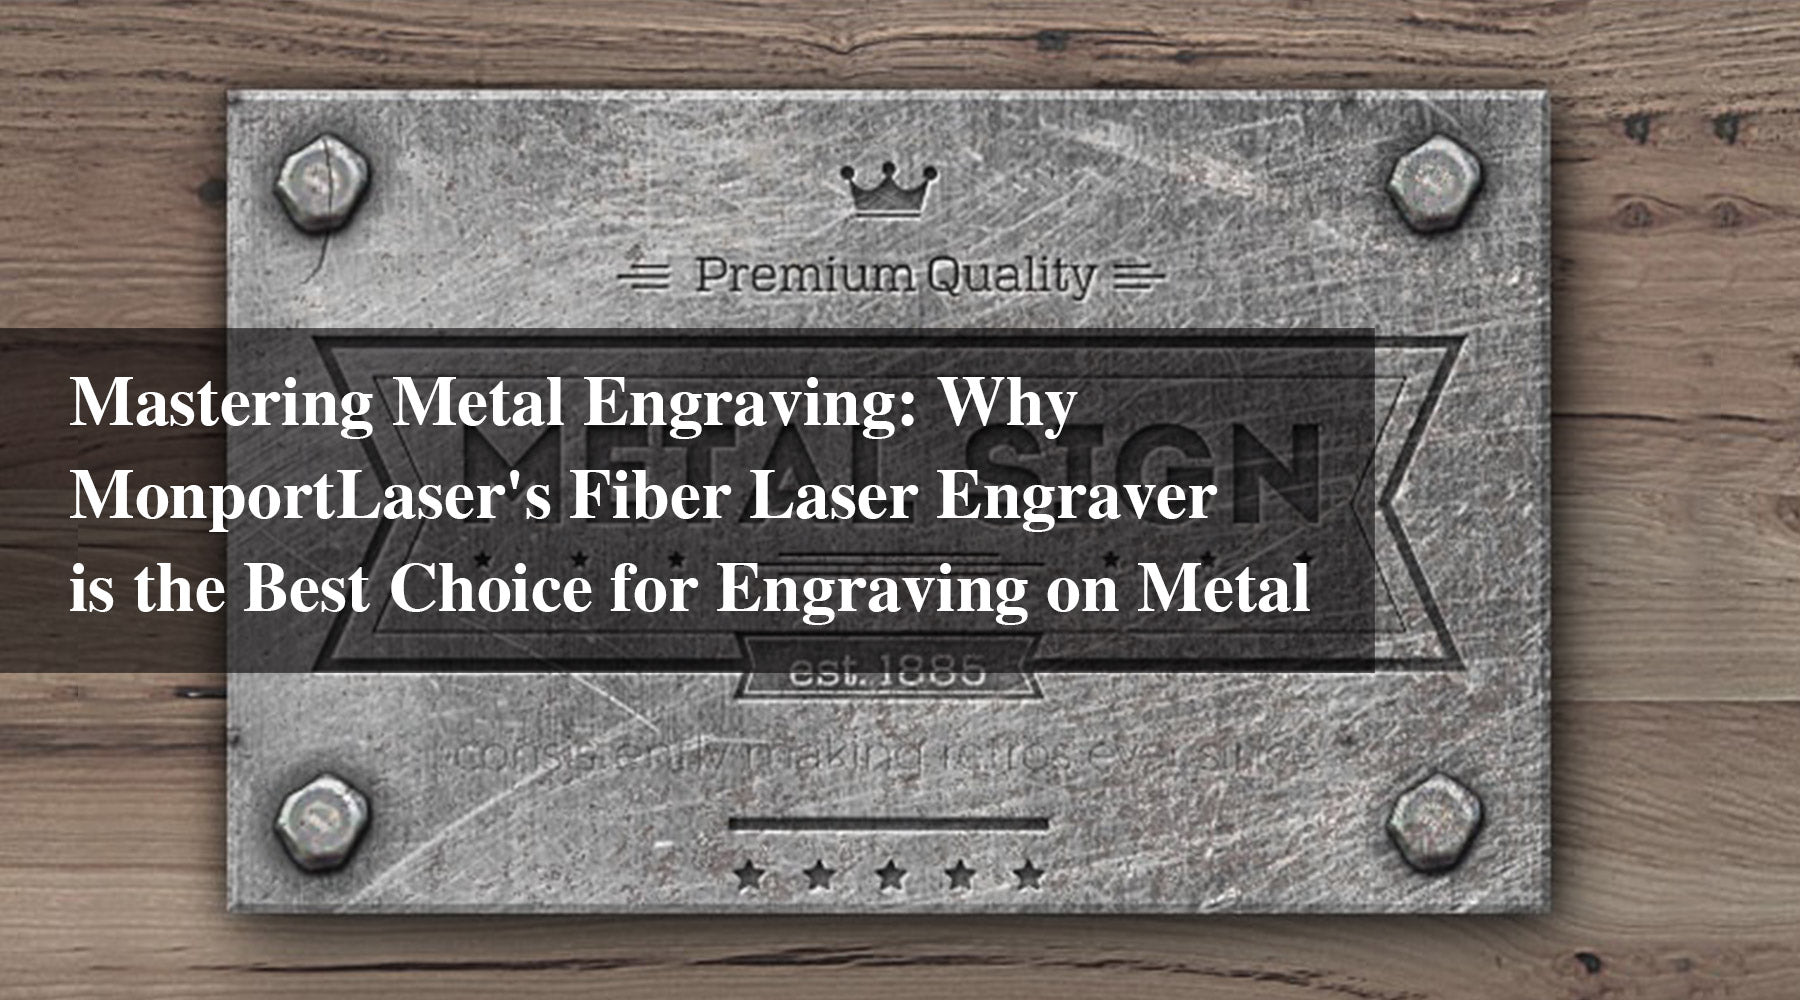 Mastering Metal Engraving: Why MonportLaser's Fiber Laser Engraver is the Best Choice for Engraving on Metal